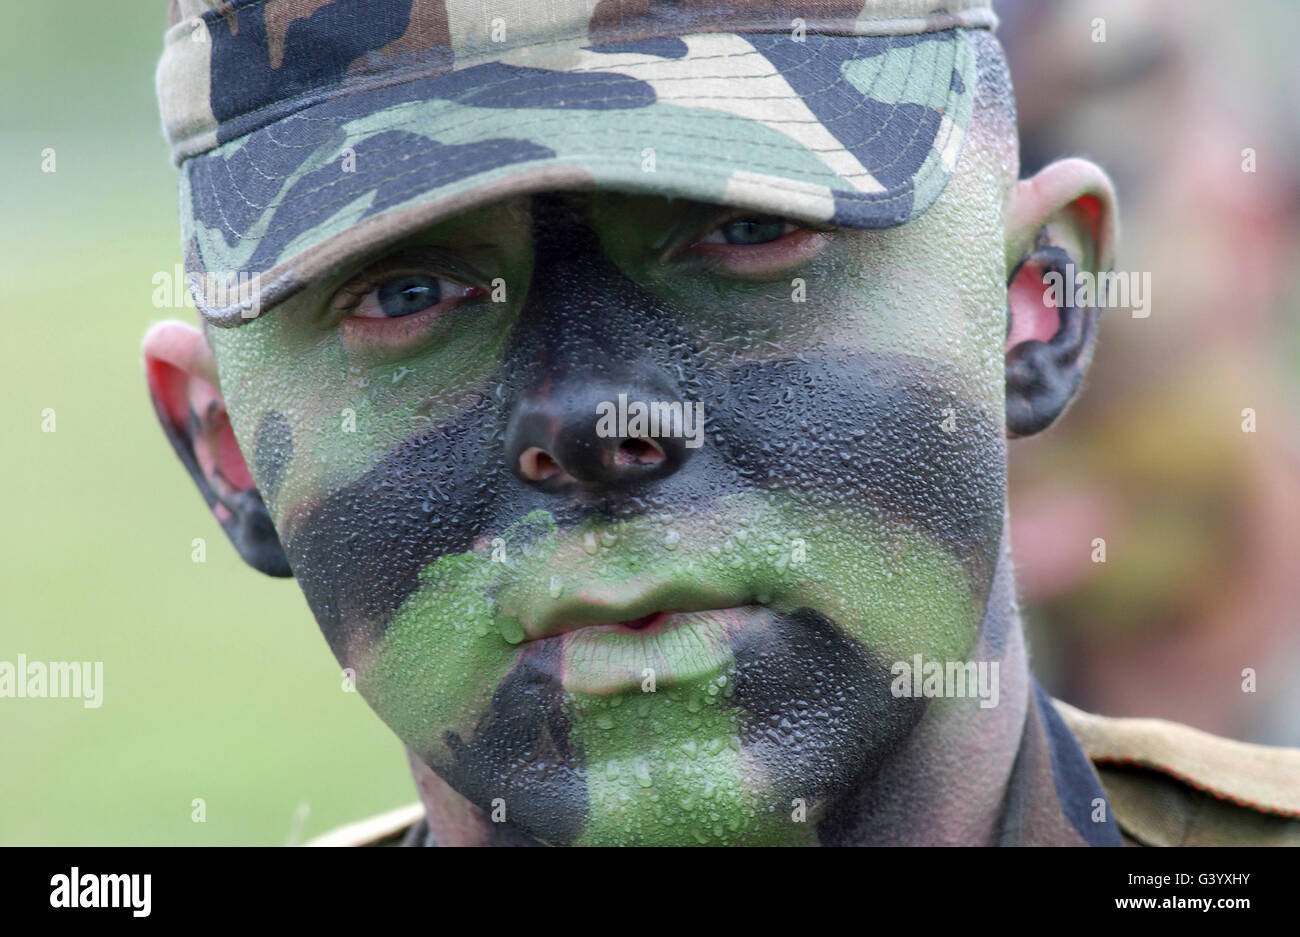 U.S. Army Soldier wearing camouflage paint. Stock Photo